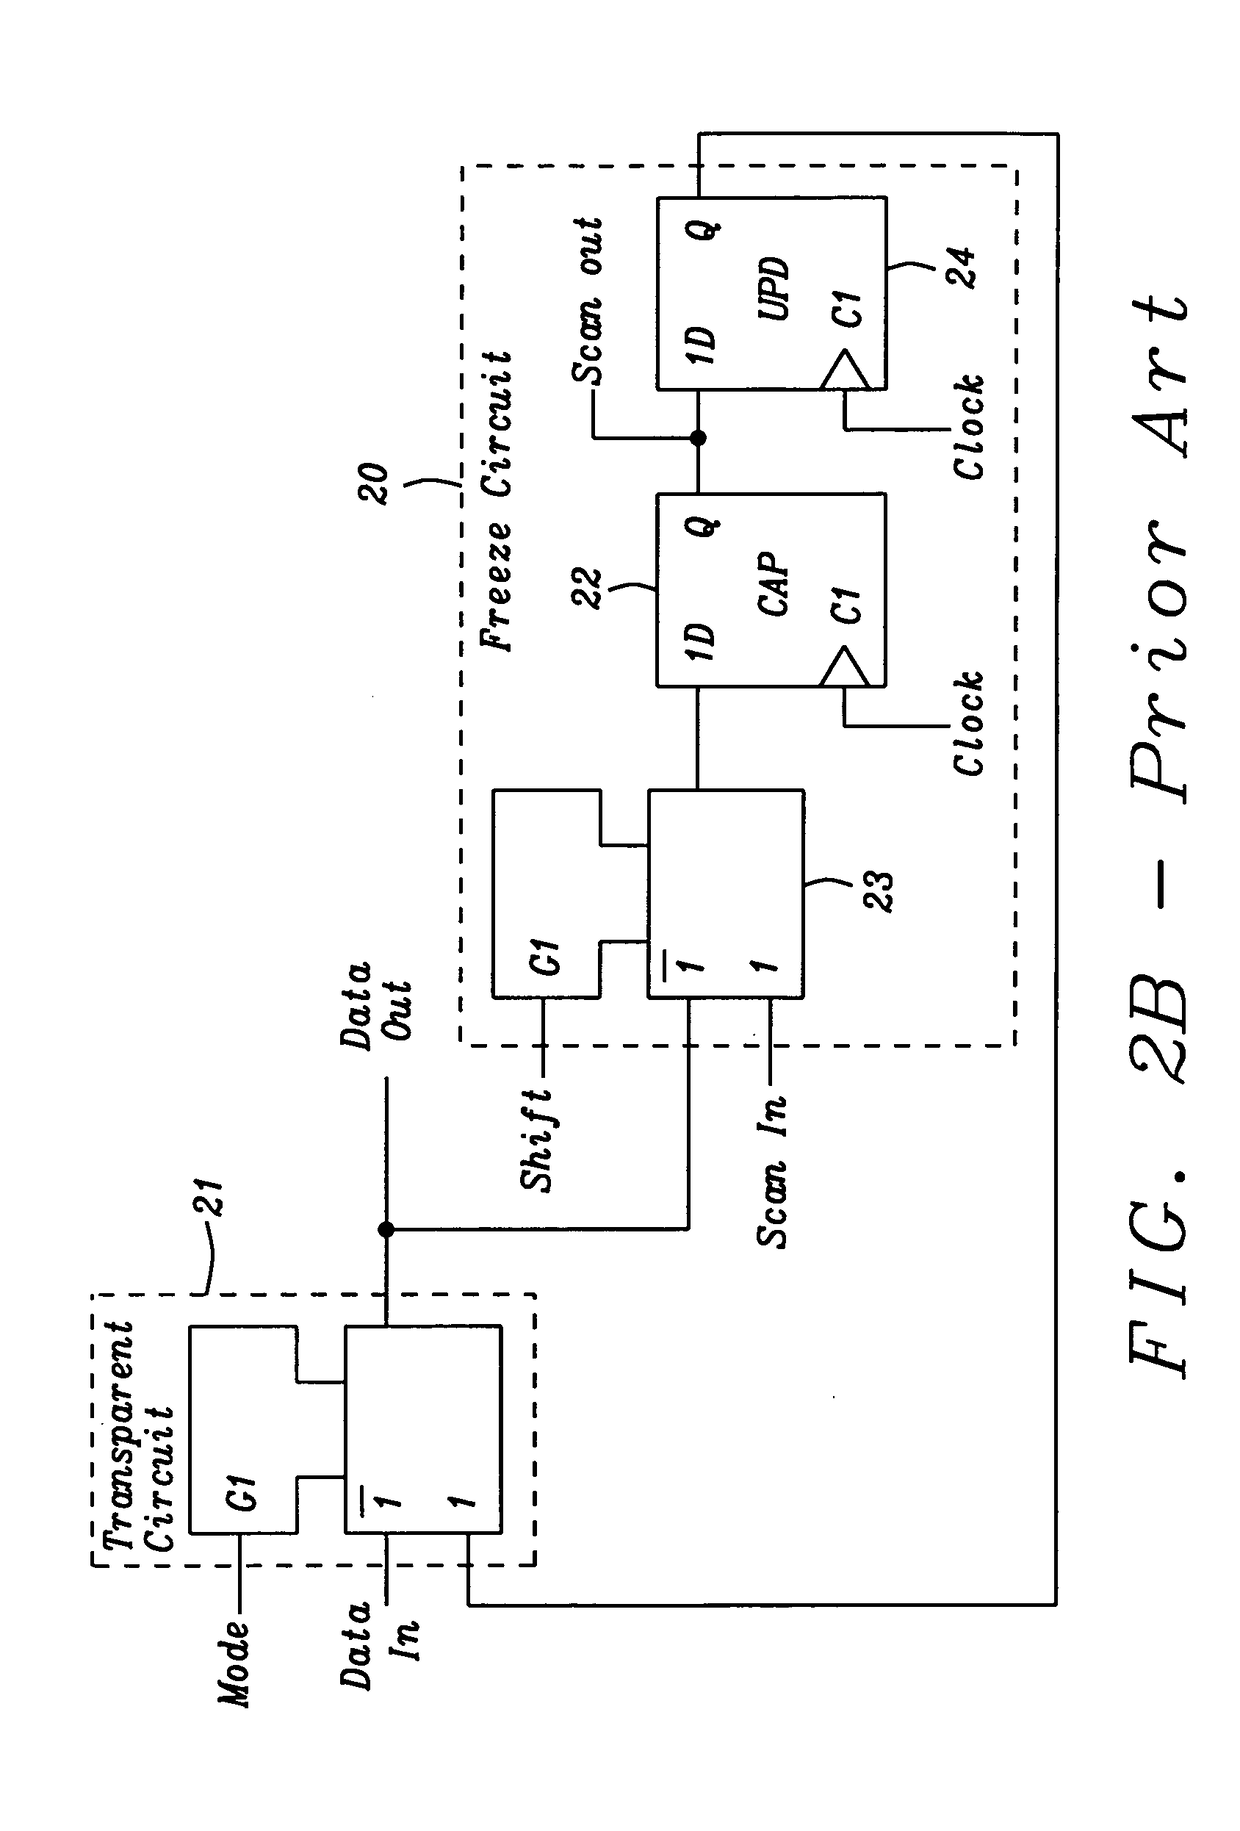 Low leakage boundary scan device design and implementation